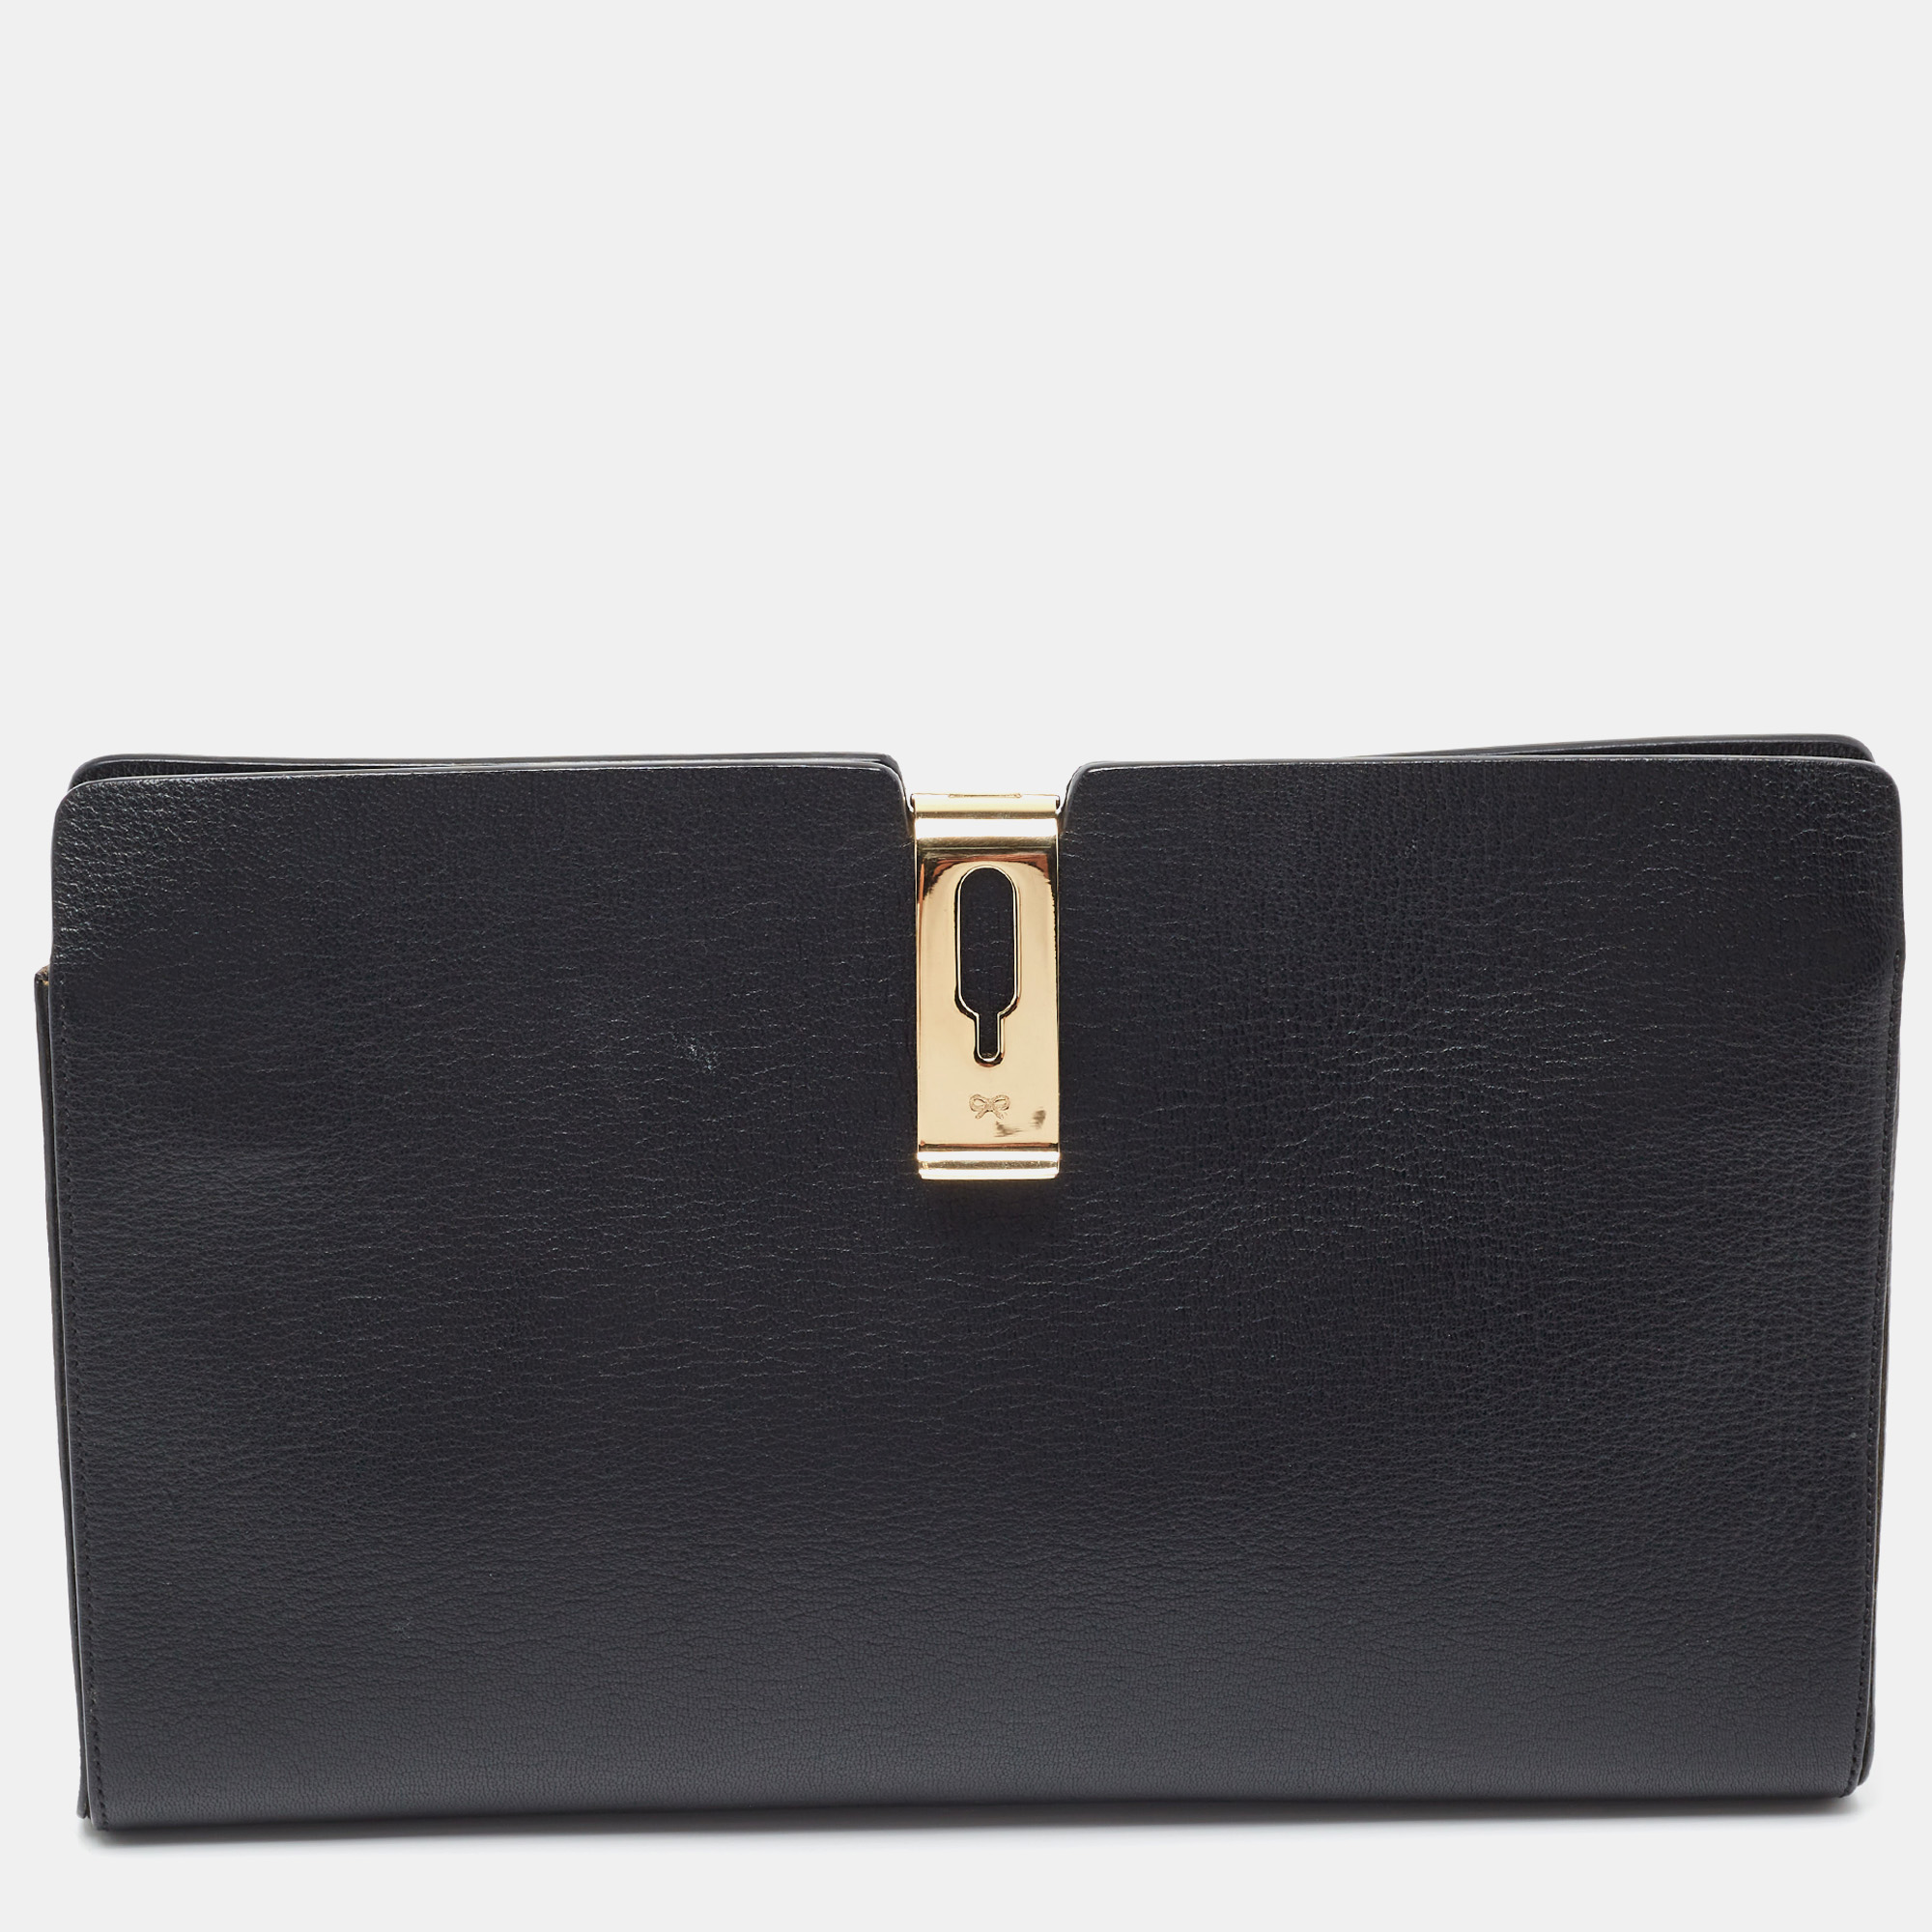 Pre-owned Anya Hindmarch Black Leather Metal Flap Clutch